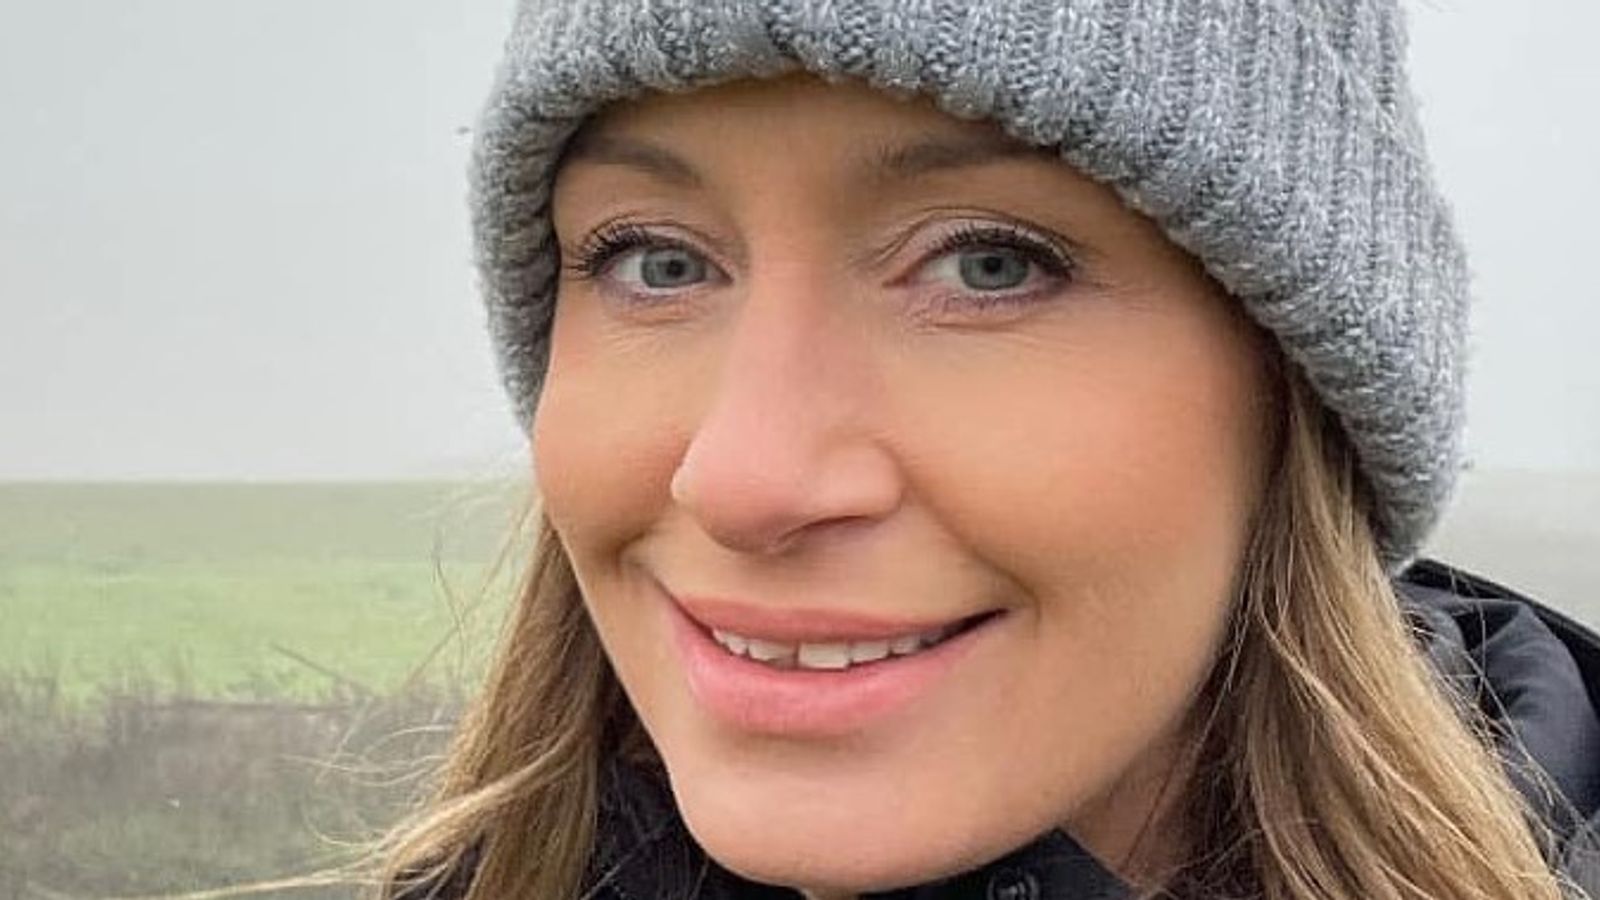 Nicola Bulley: Home secretary demands police explain 'concerning' decision to reveal details of missing woman's private life